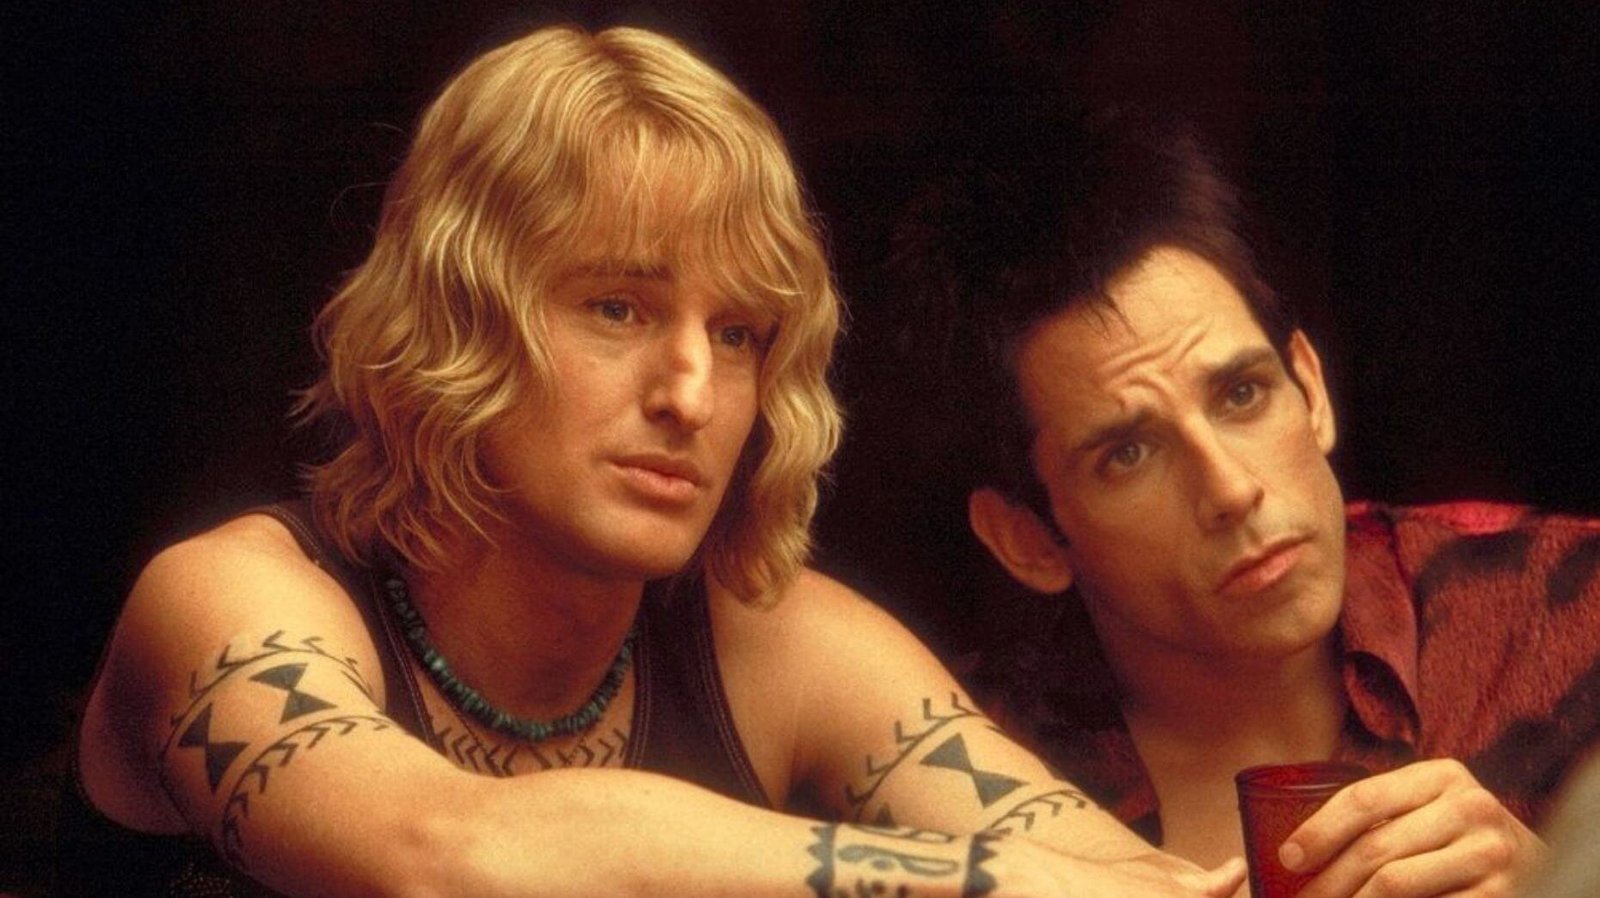 15 Zoolander Quotes To Make You Laugh